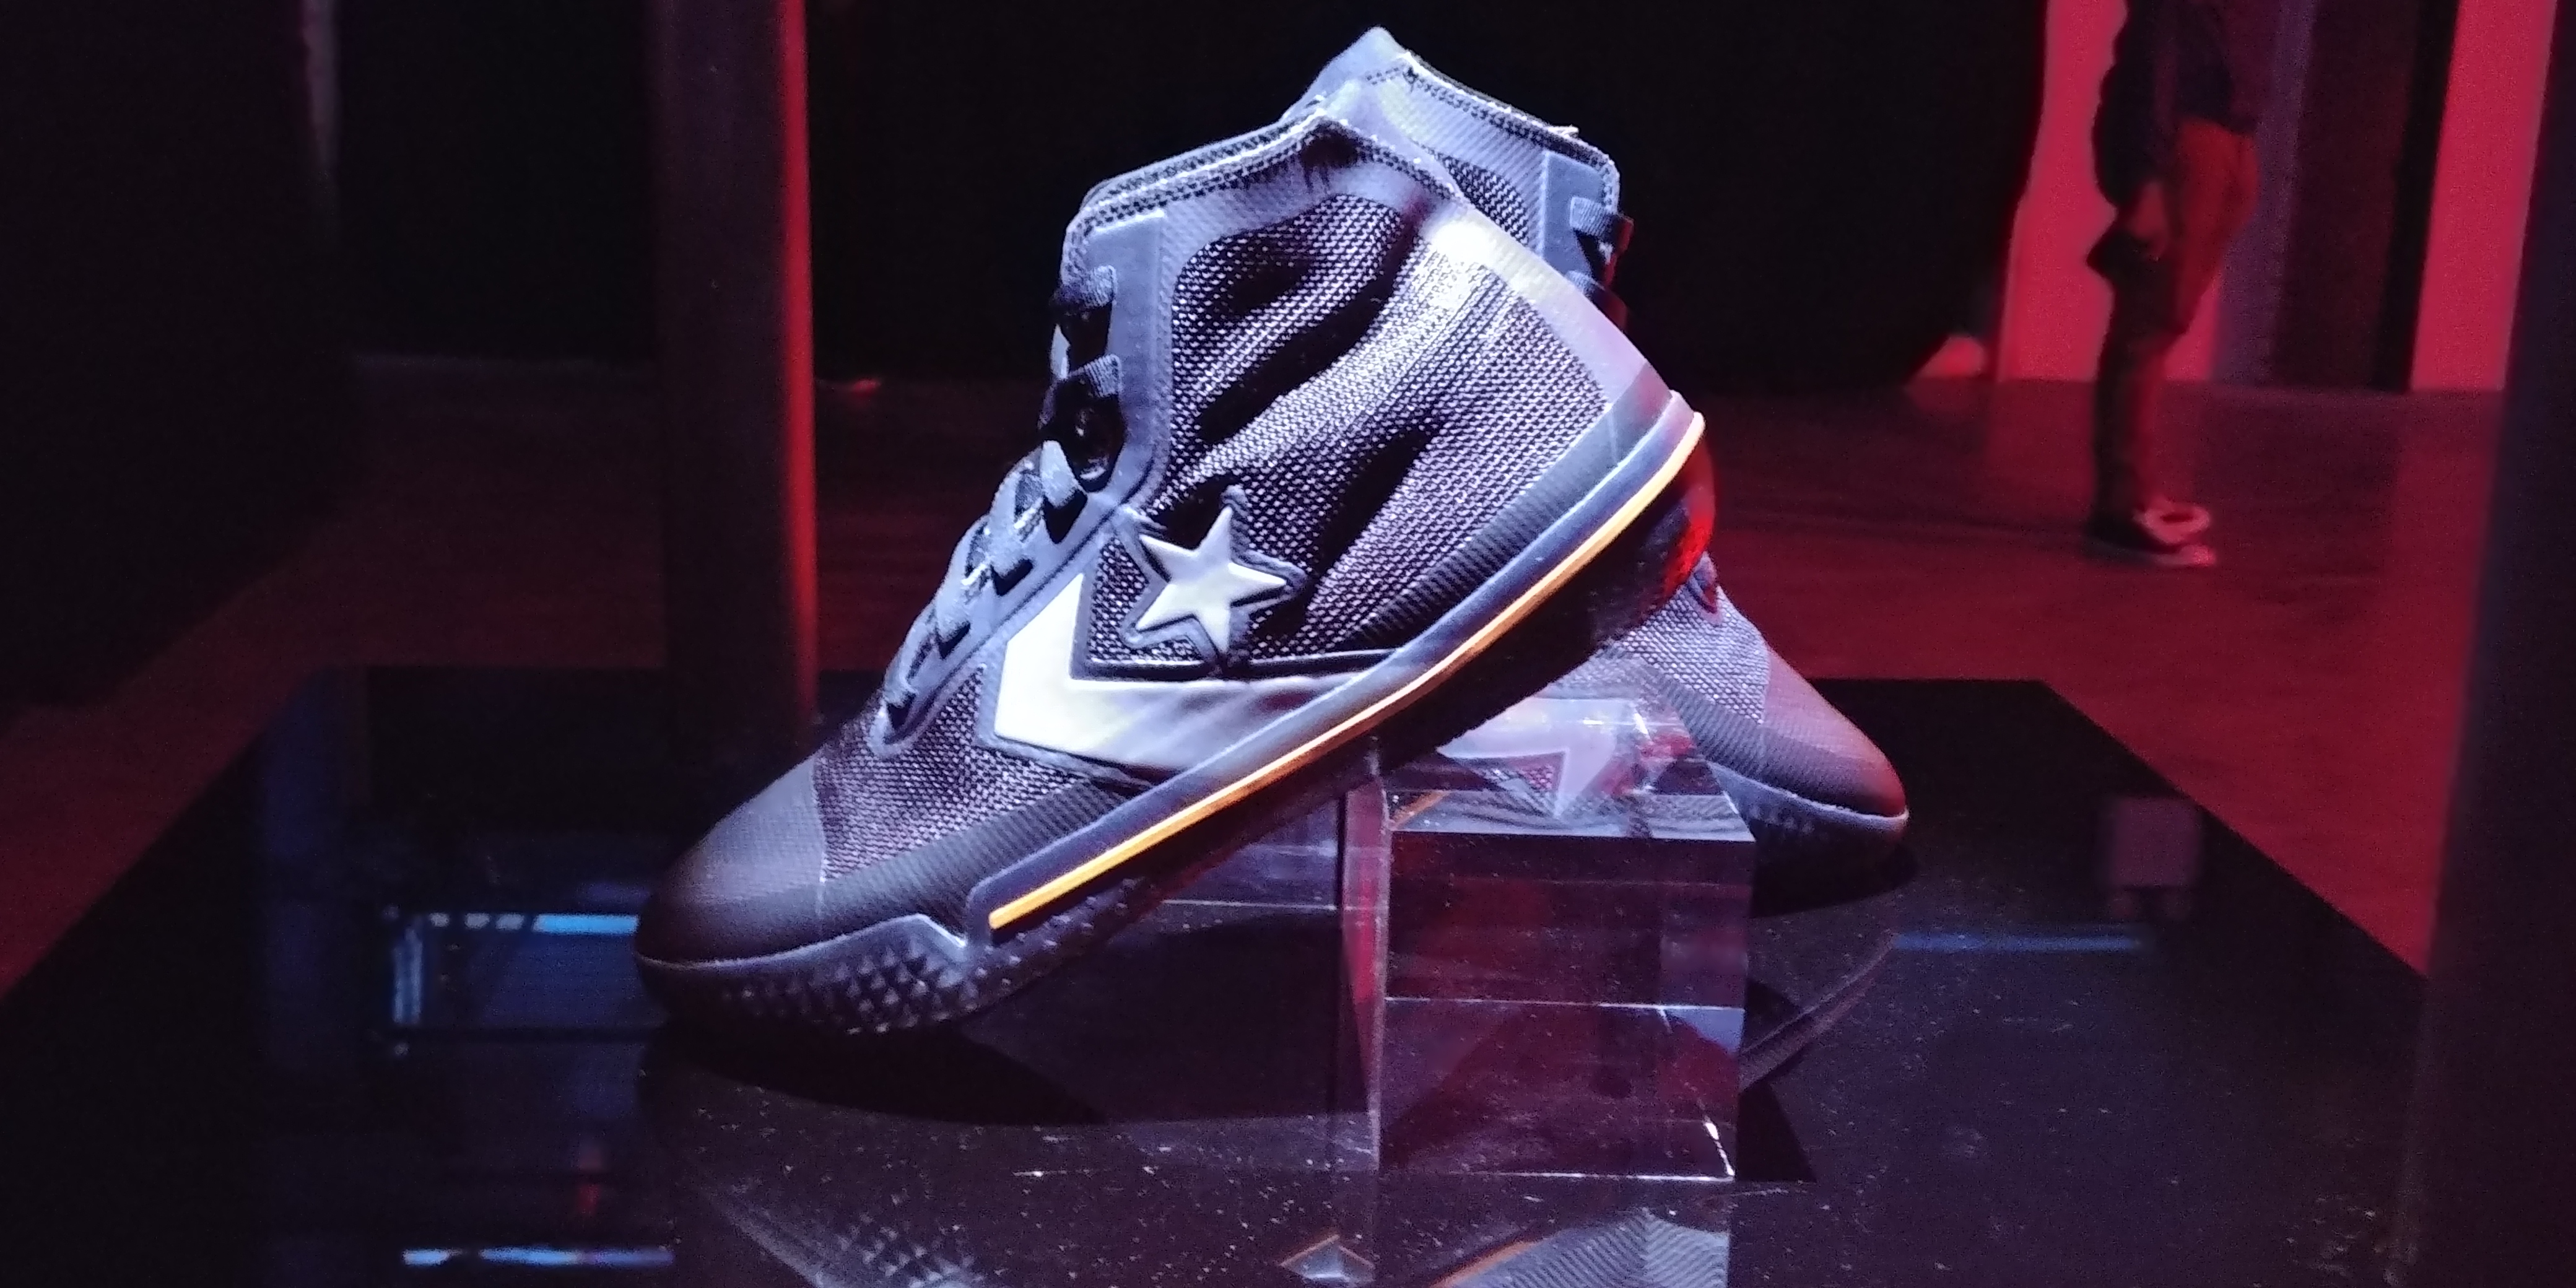 Converse its new basketball shoe, the All Pro